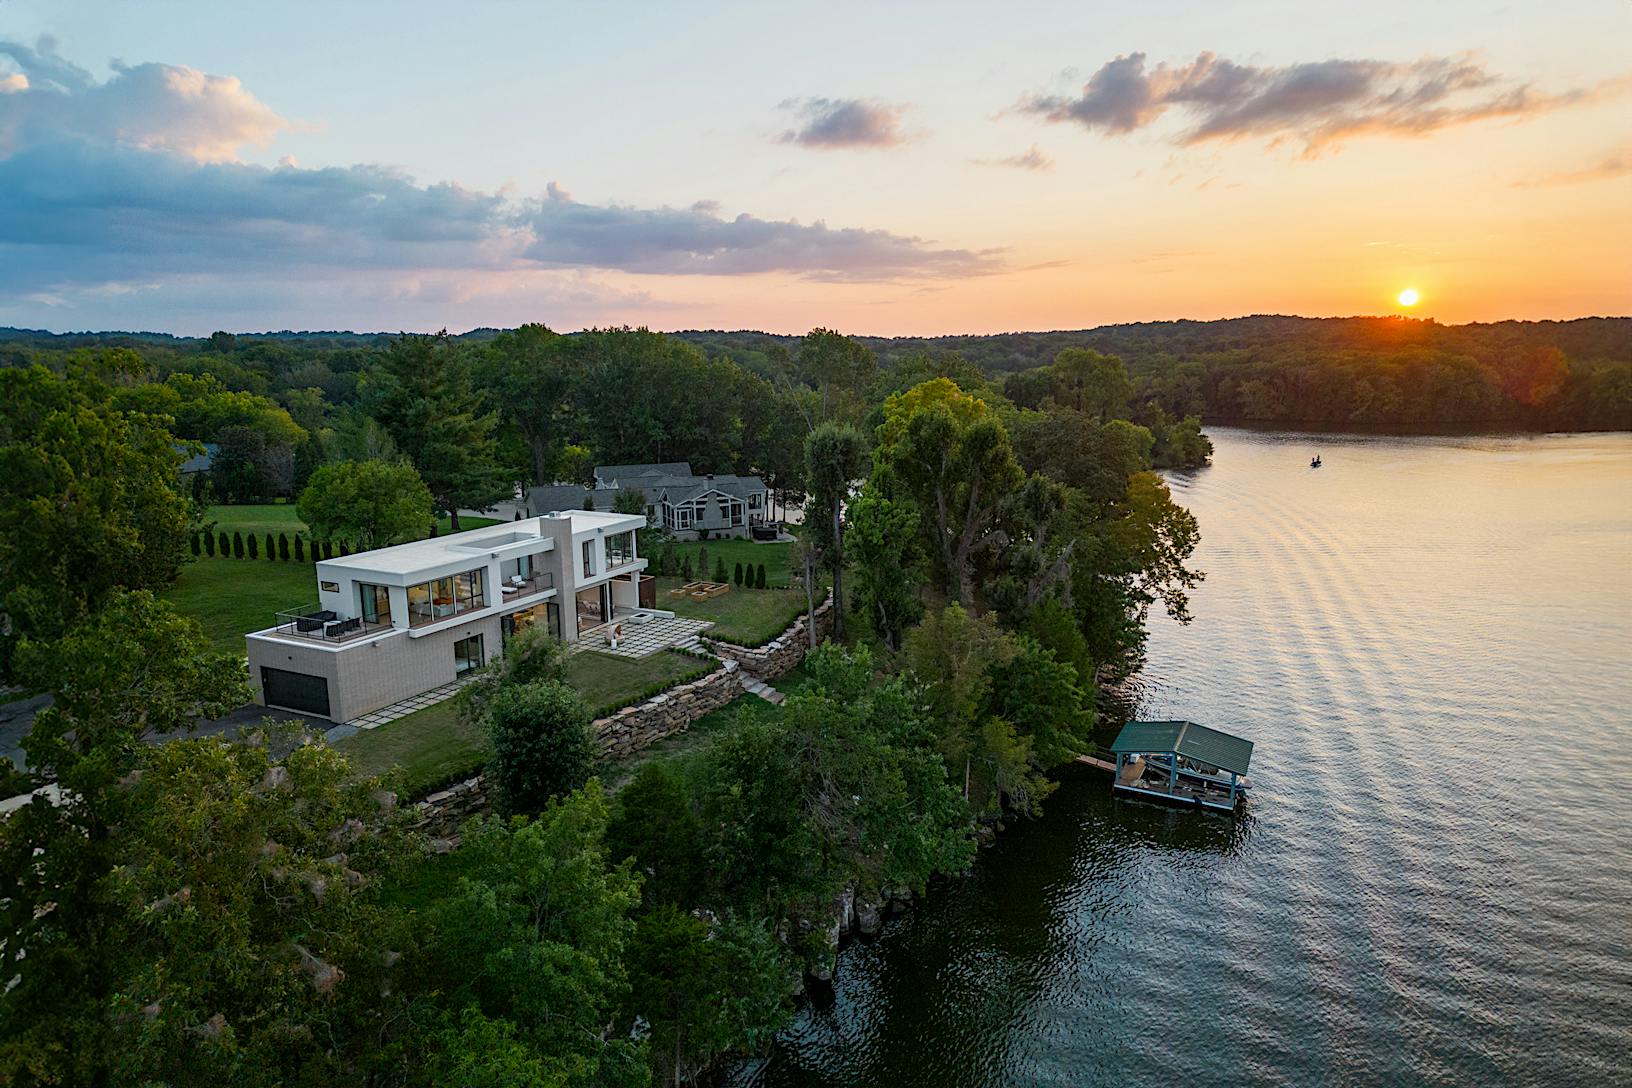 A modern house with large windows stands on the edge of a wooded area overlooking a lake at sunset.